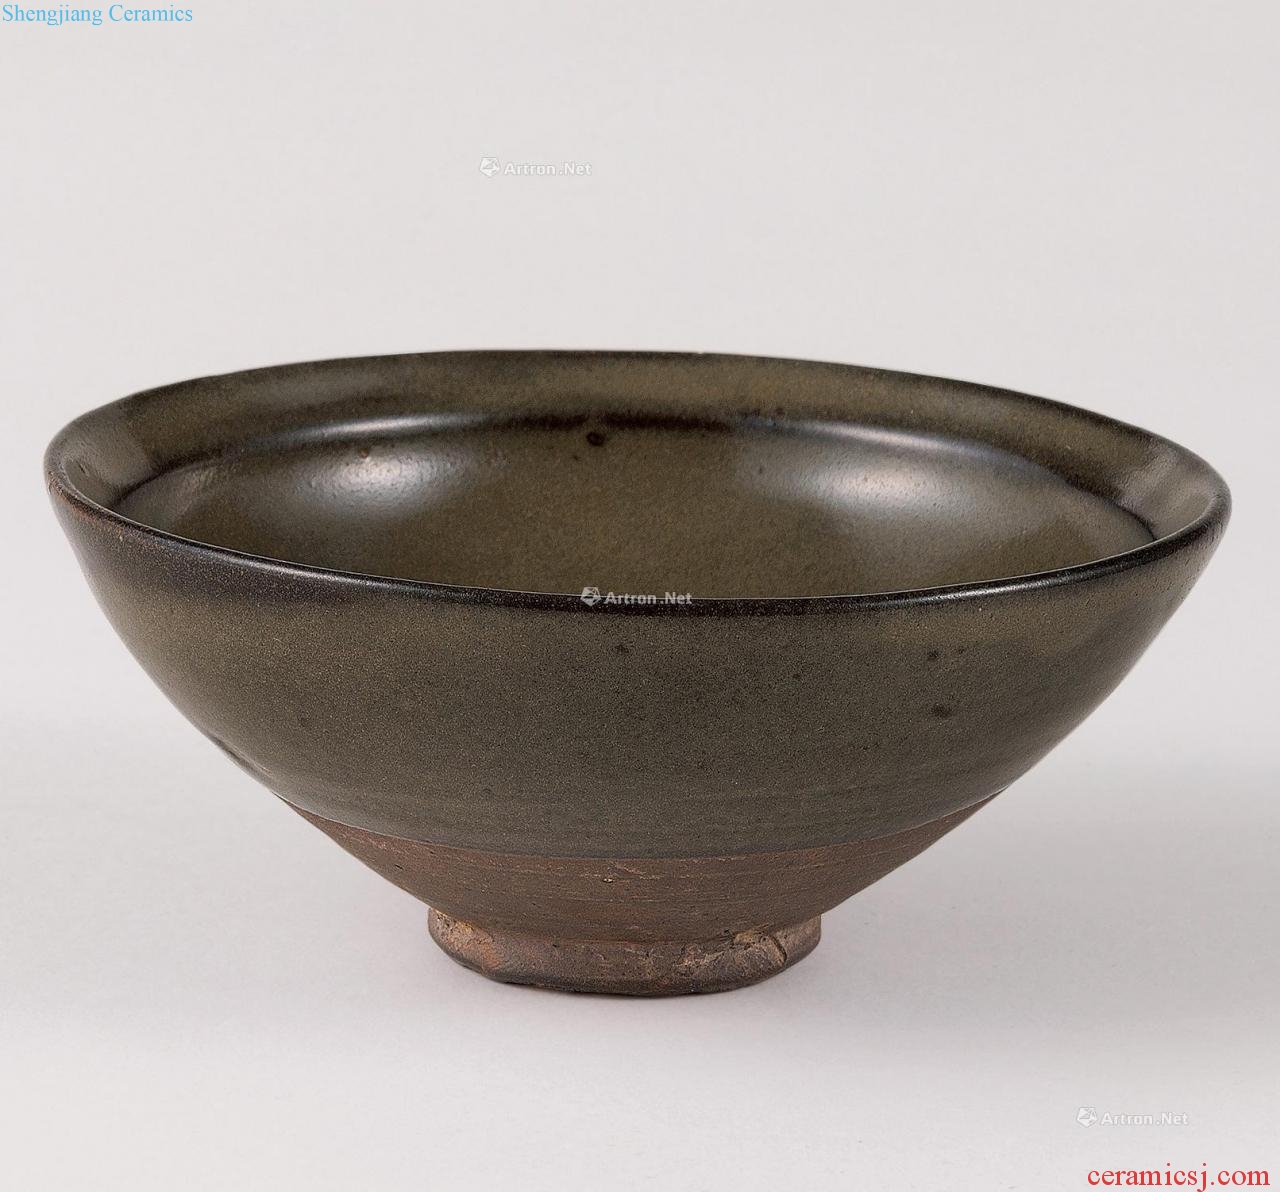 The song dynasty Tea at the end of the bowl